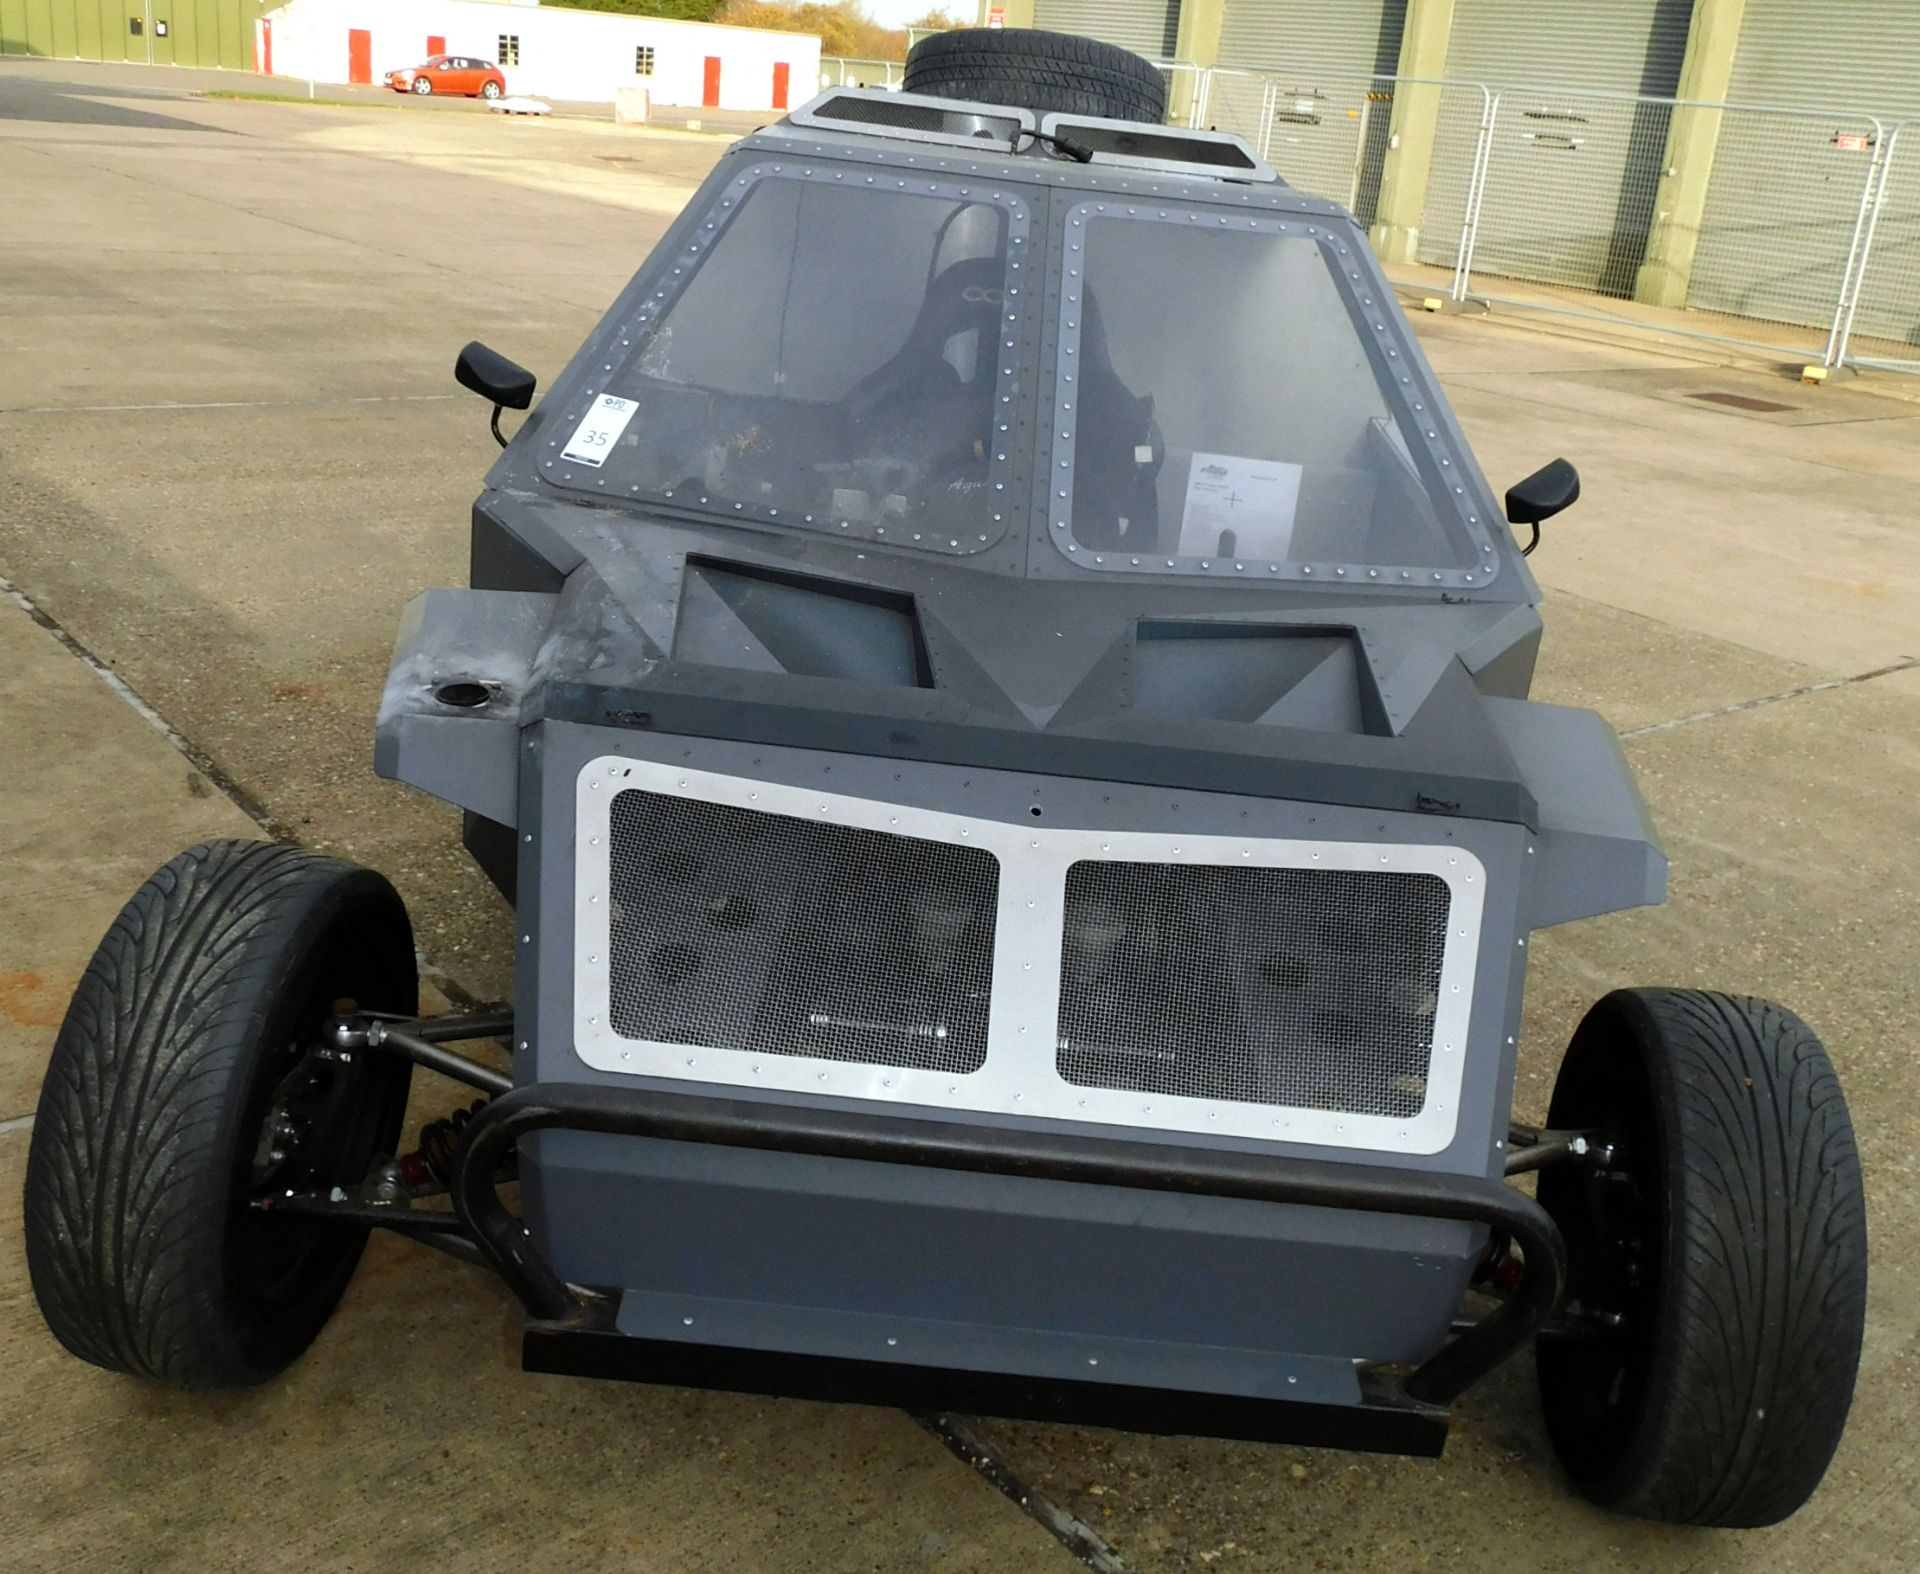 Bespoke Off-Road Buggy, Rear Wheel Drive, Chassis Number FL0002, Suzuki Hyabusa 1300cc 4 Cylinder - Image 6 of 7